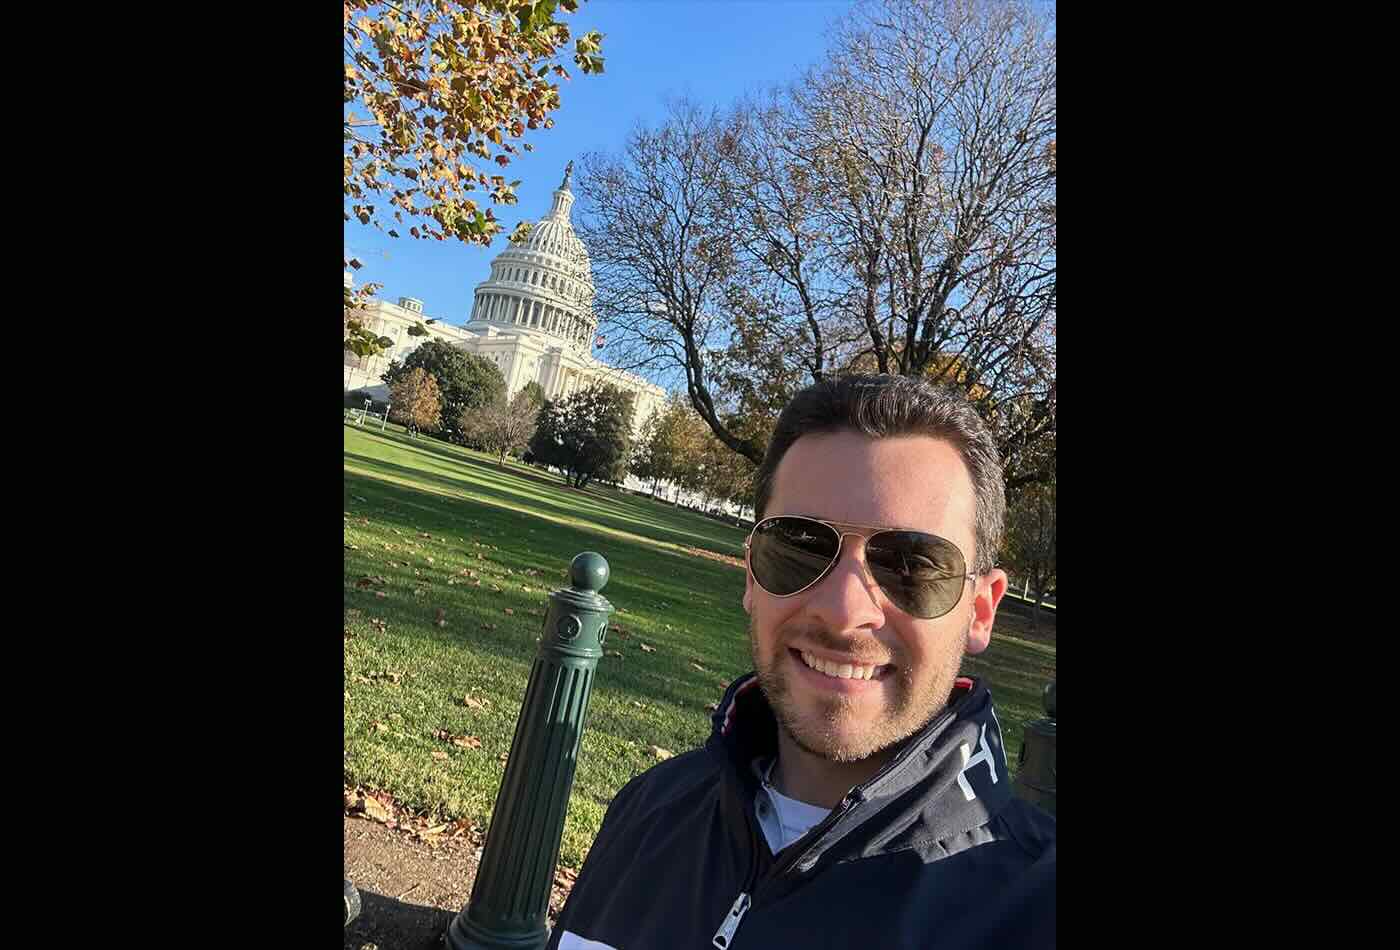 Paul Cesana smiles in front of the US Capitol Building in Washington, DC.